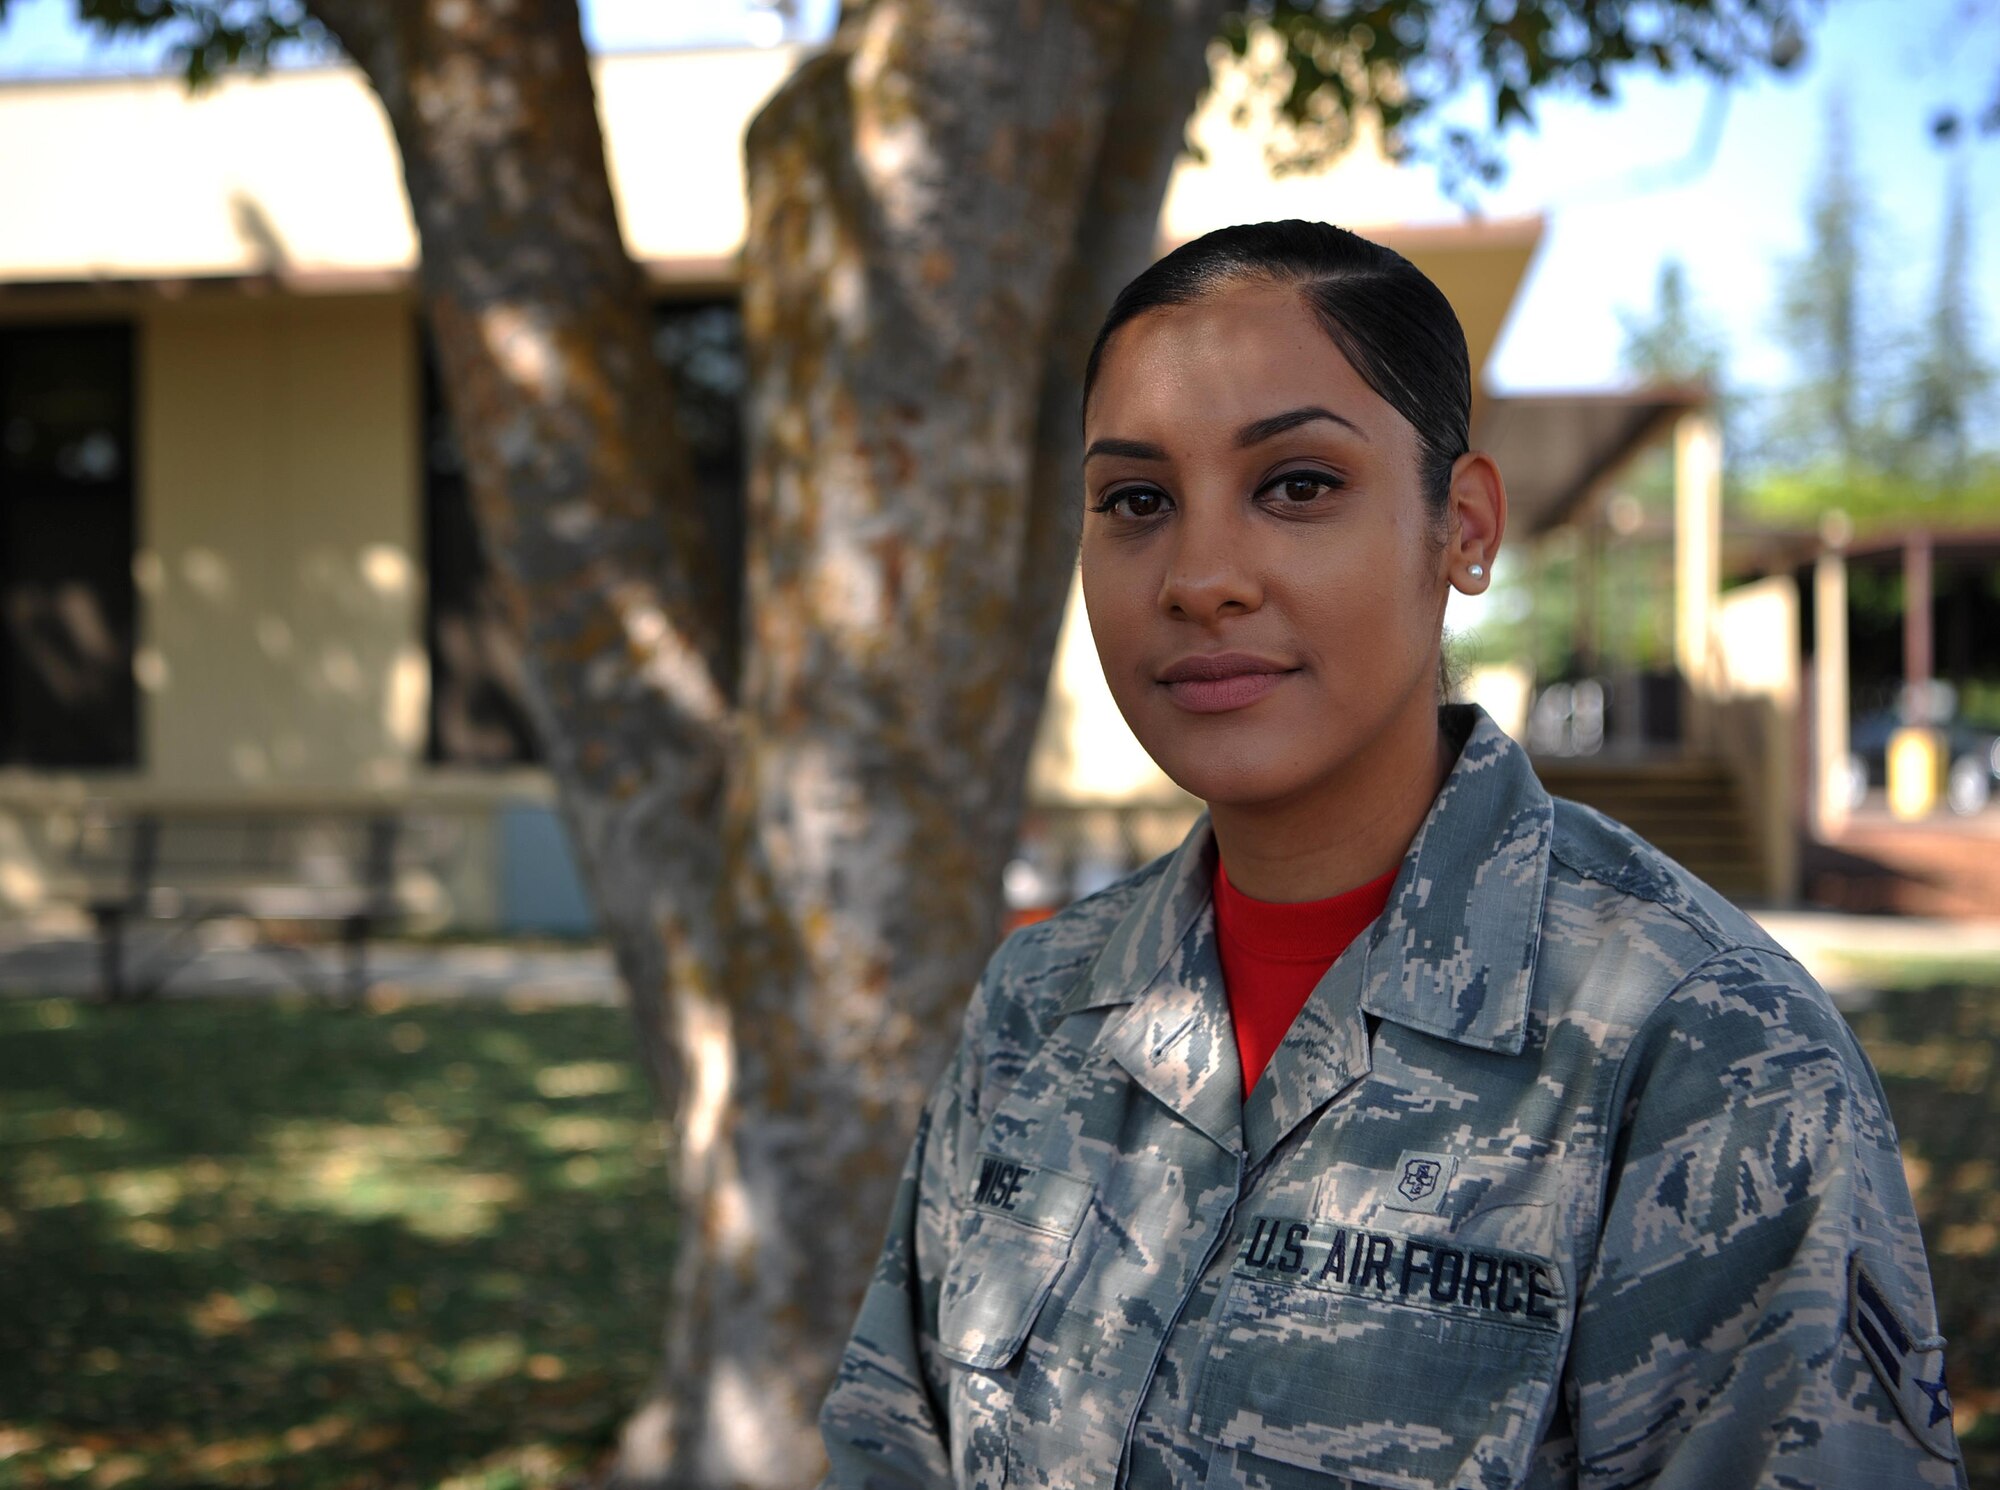 Airman 1st Class Regina Wise, 9th Medical Operations Squadron pediatric medical technician, poses for a photo.